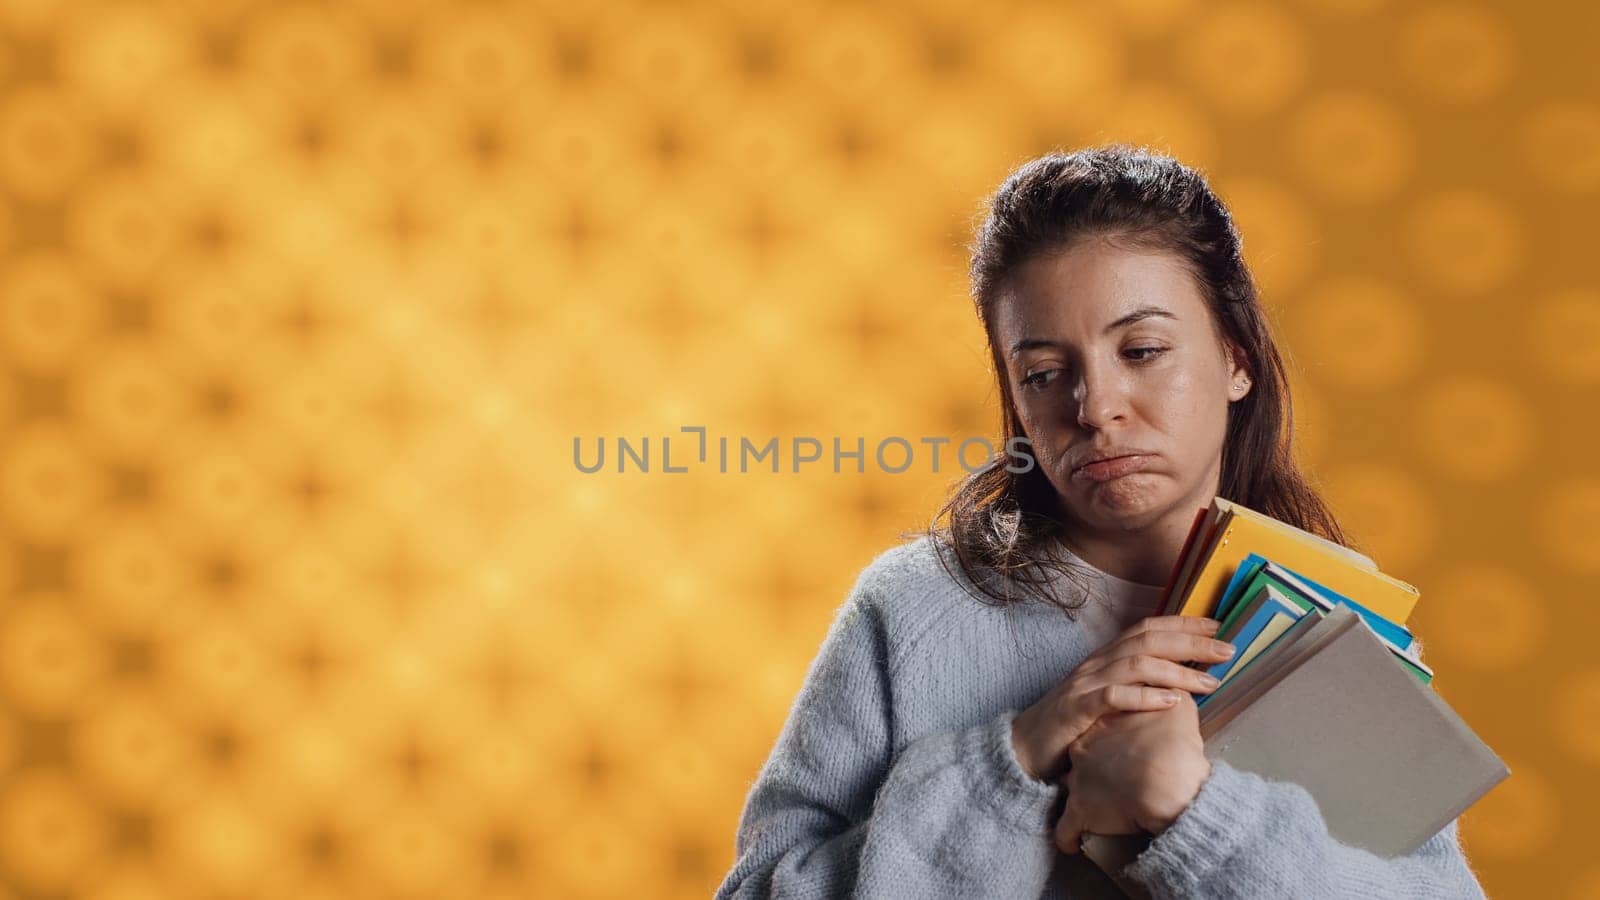 Exhausted woman yawning, holding heavy stack of books needed for school exam, studio background. Student yearning for sleep, tired of learning from academic textbooks, camera A